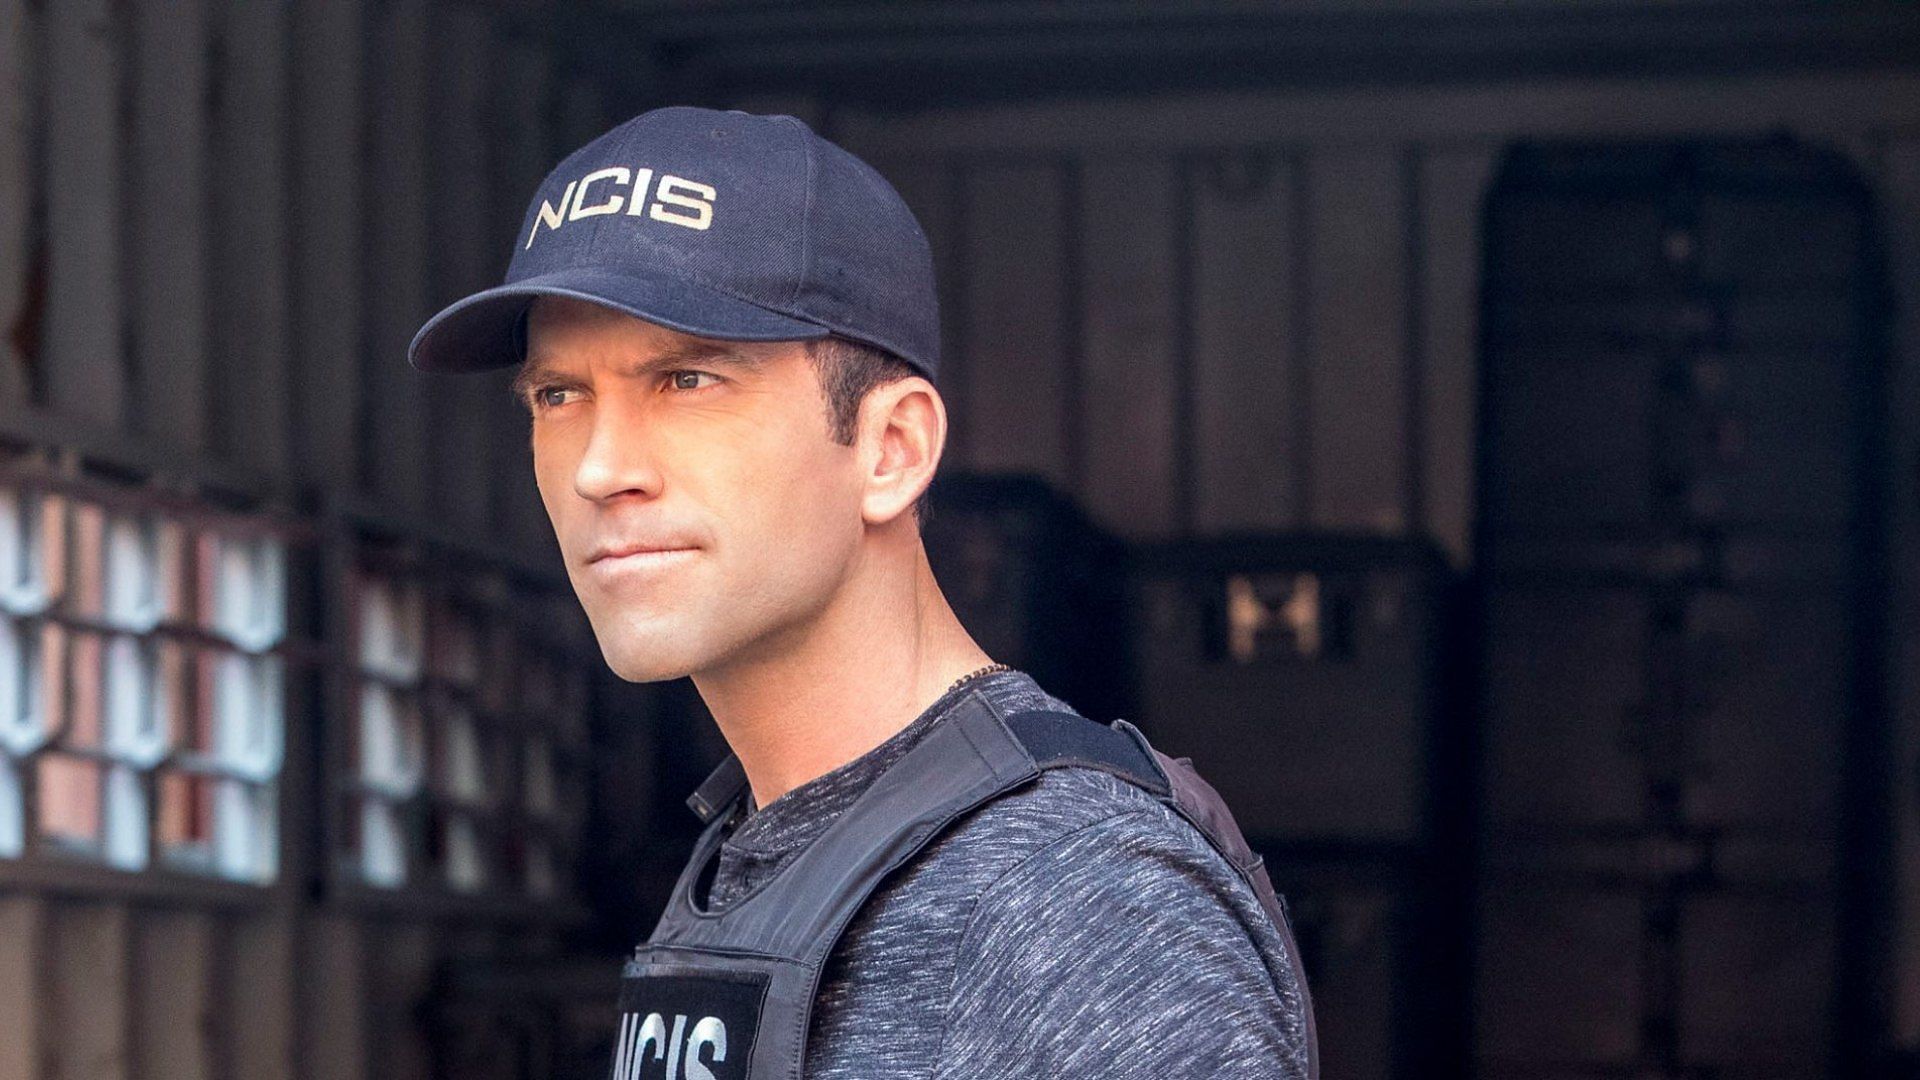 Lucas Black seen as Christopher LaSalle in NCIS - New Orleans (Image via Facebook/NCIS New Orleans)